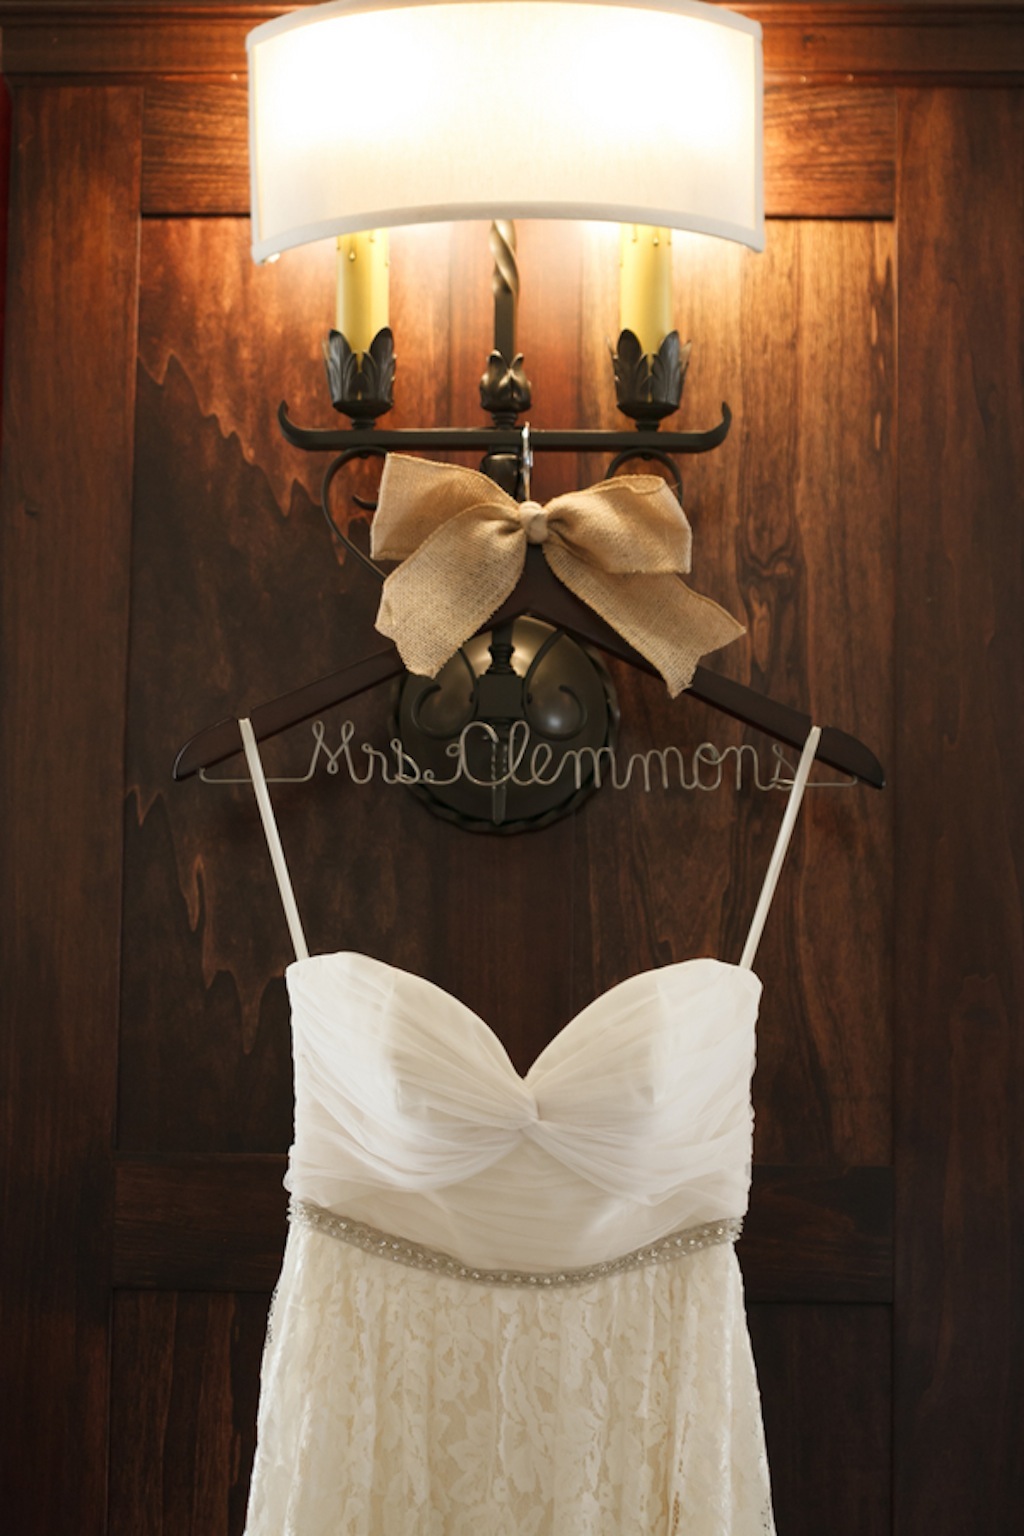 Rustic Wedding Dress from the White Magnolia with Bride Hanger